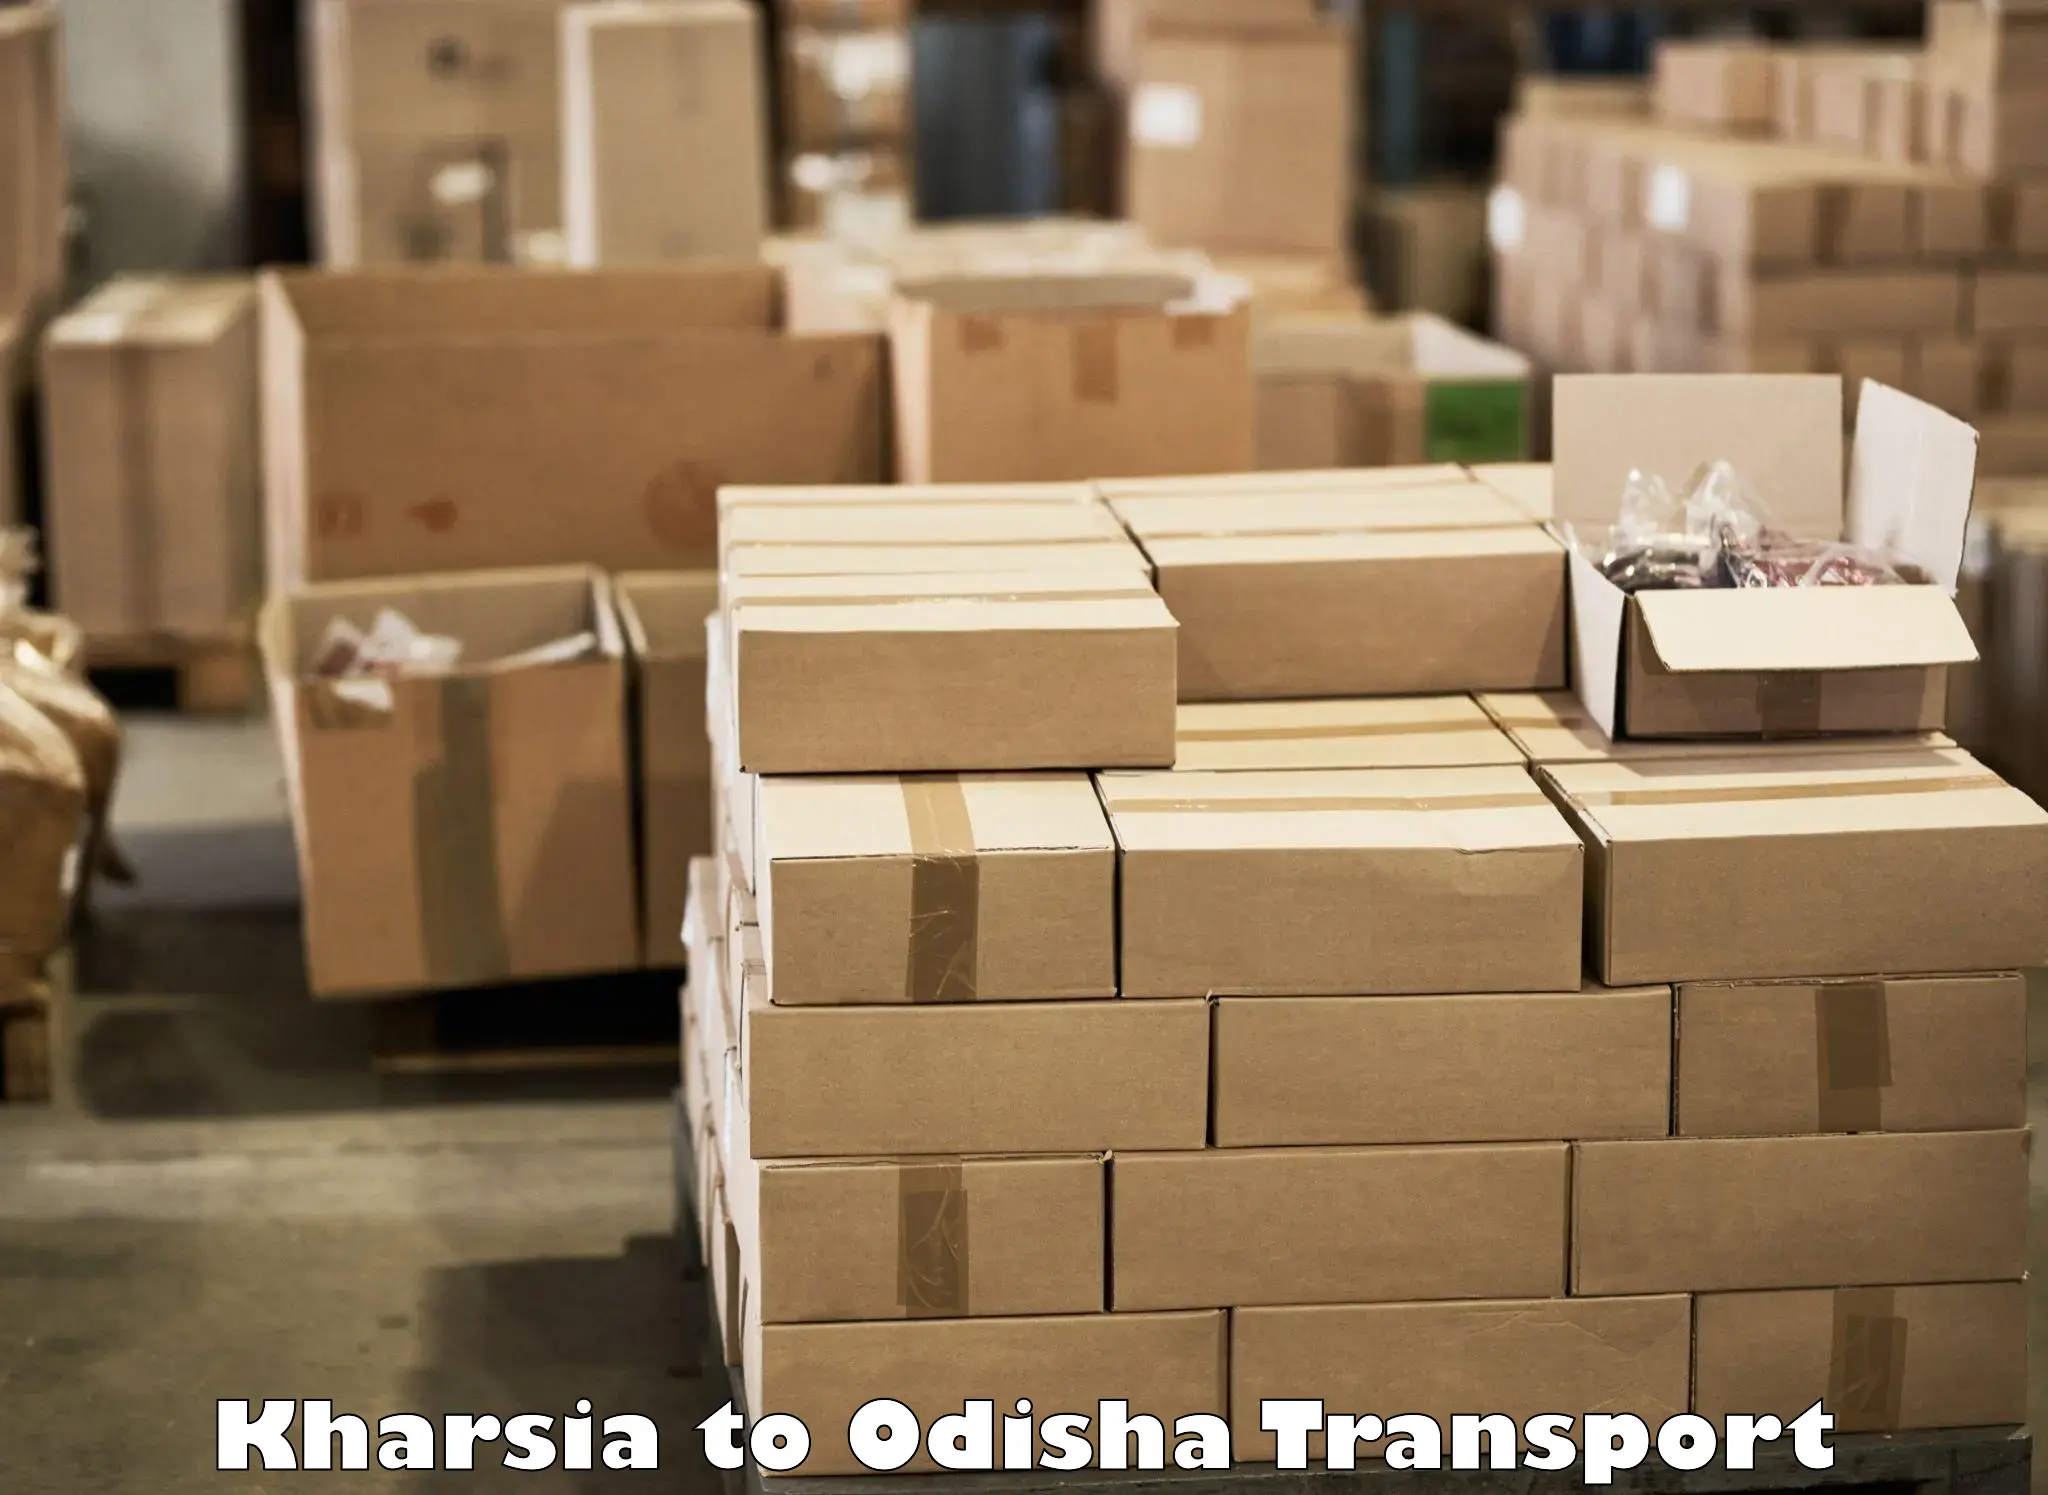 Two wheeler parcel service in Kharsia to Dhamanagar